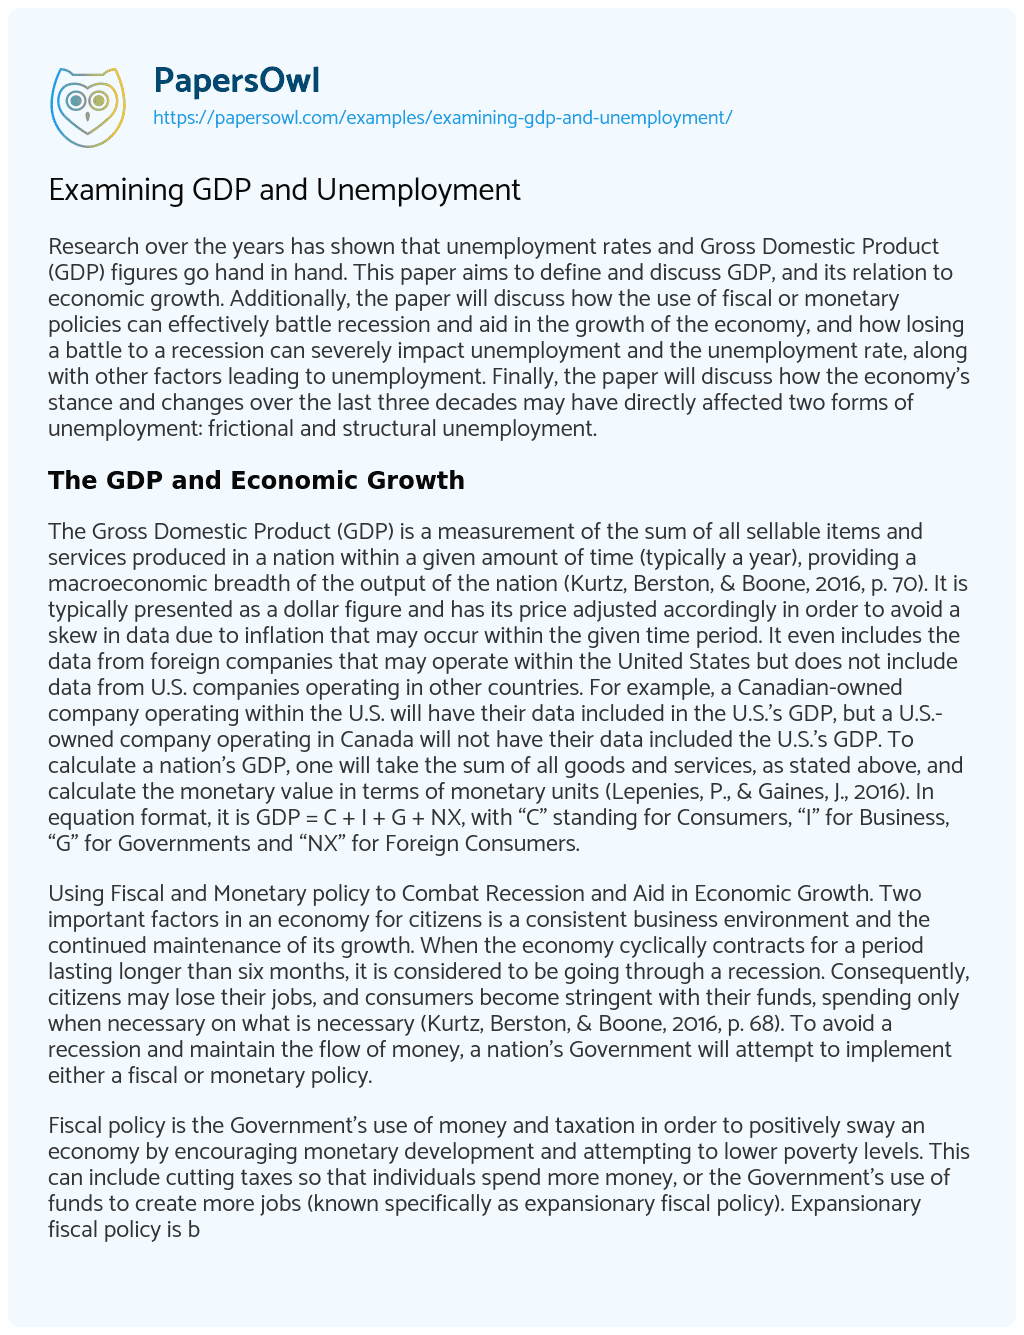 Essay on Examining GDP and Unemployment